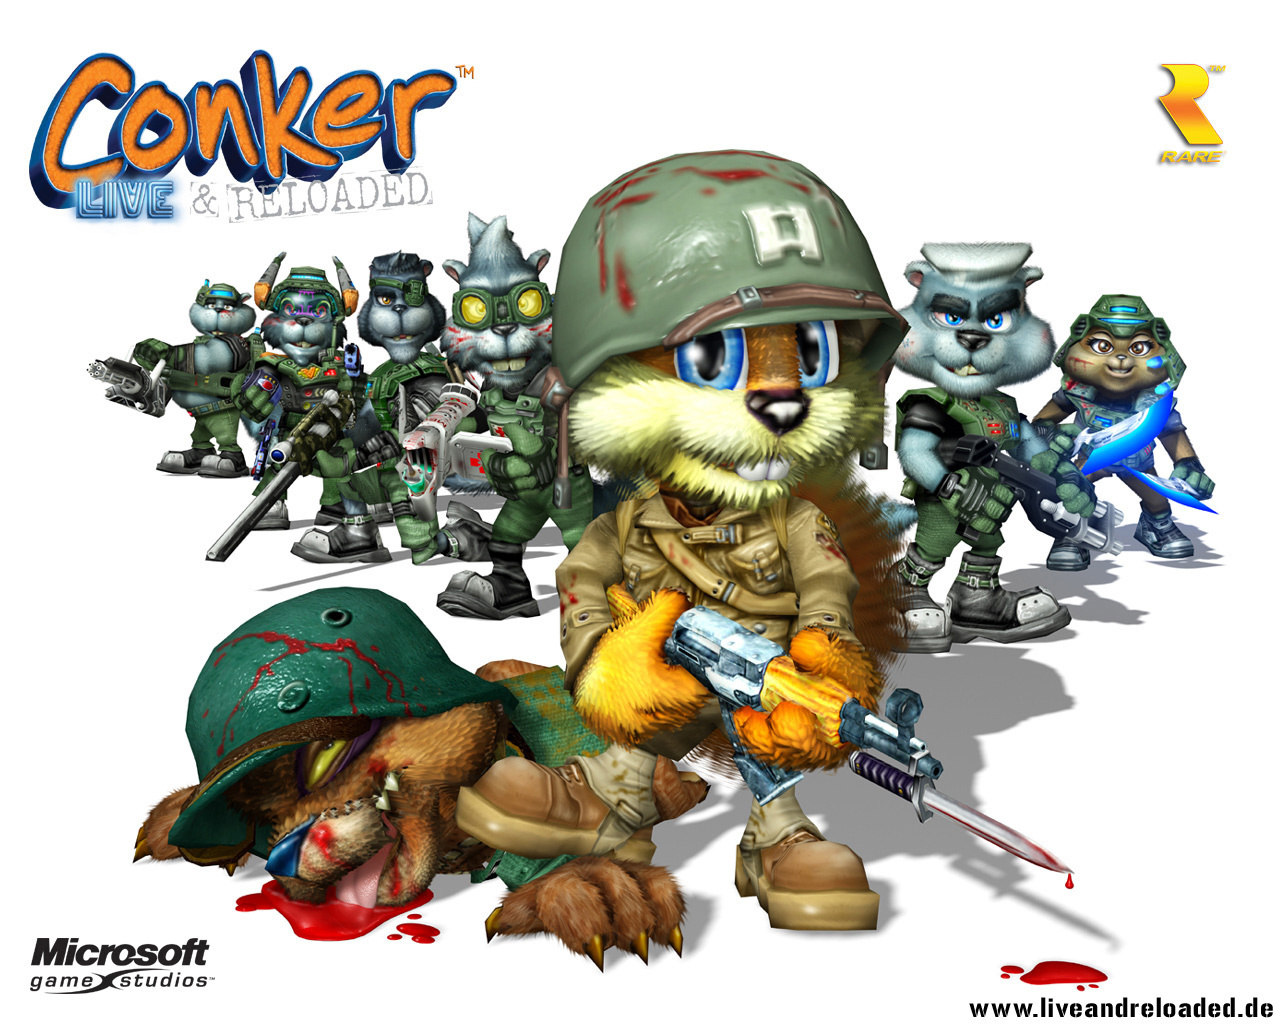 conker's bad fur day wallpaper,cartoon,illustration,fictional character,pc game,toy